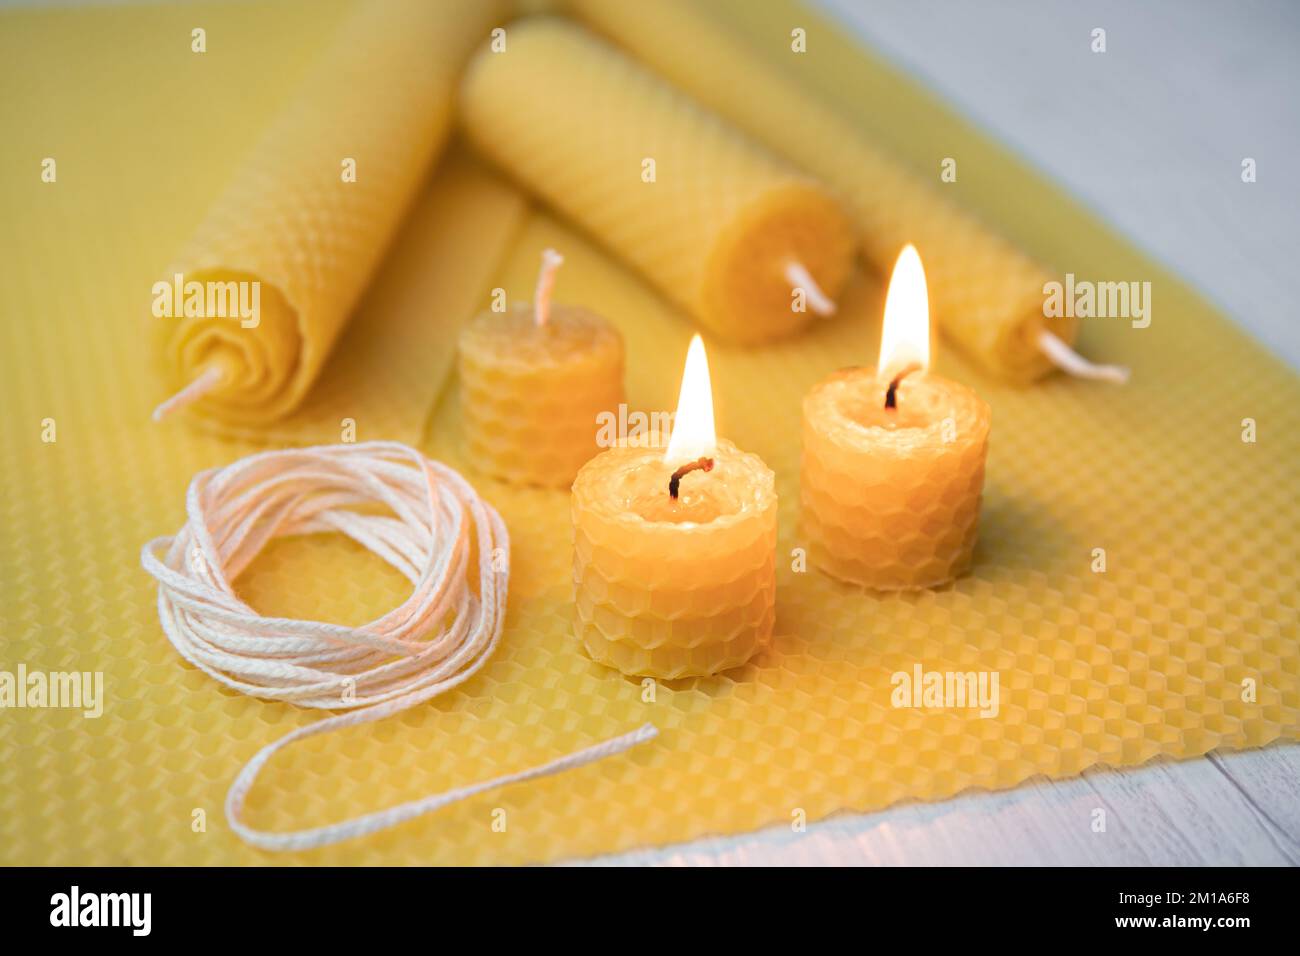 Bees Wax Candles Christmas Decoration Stock Photo - Download Image Now -  Basket, Bee, Beeswax - iStock